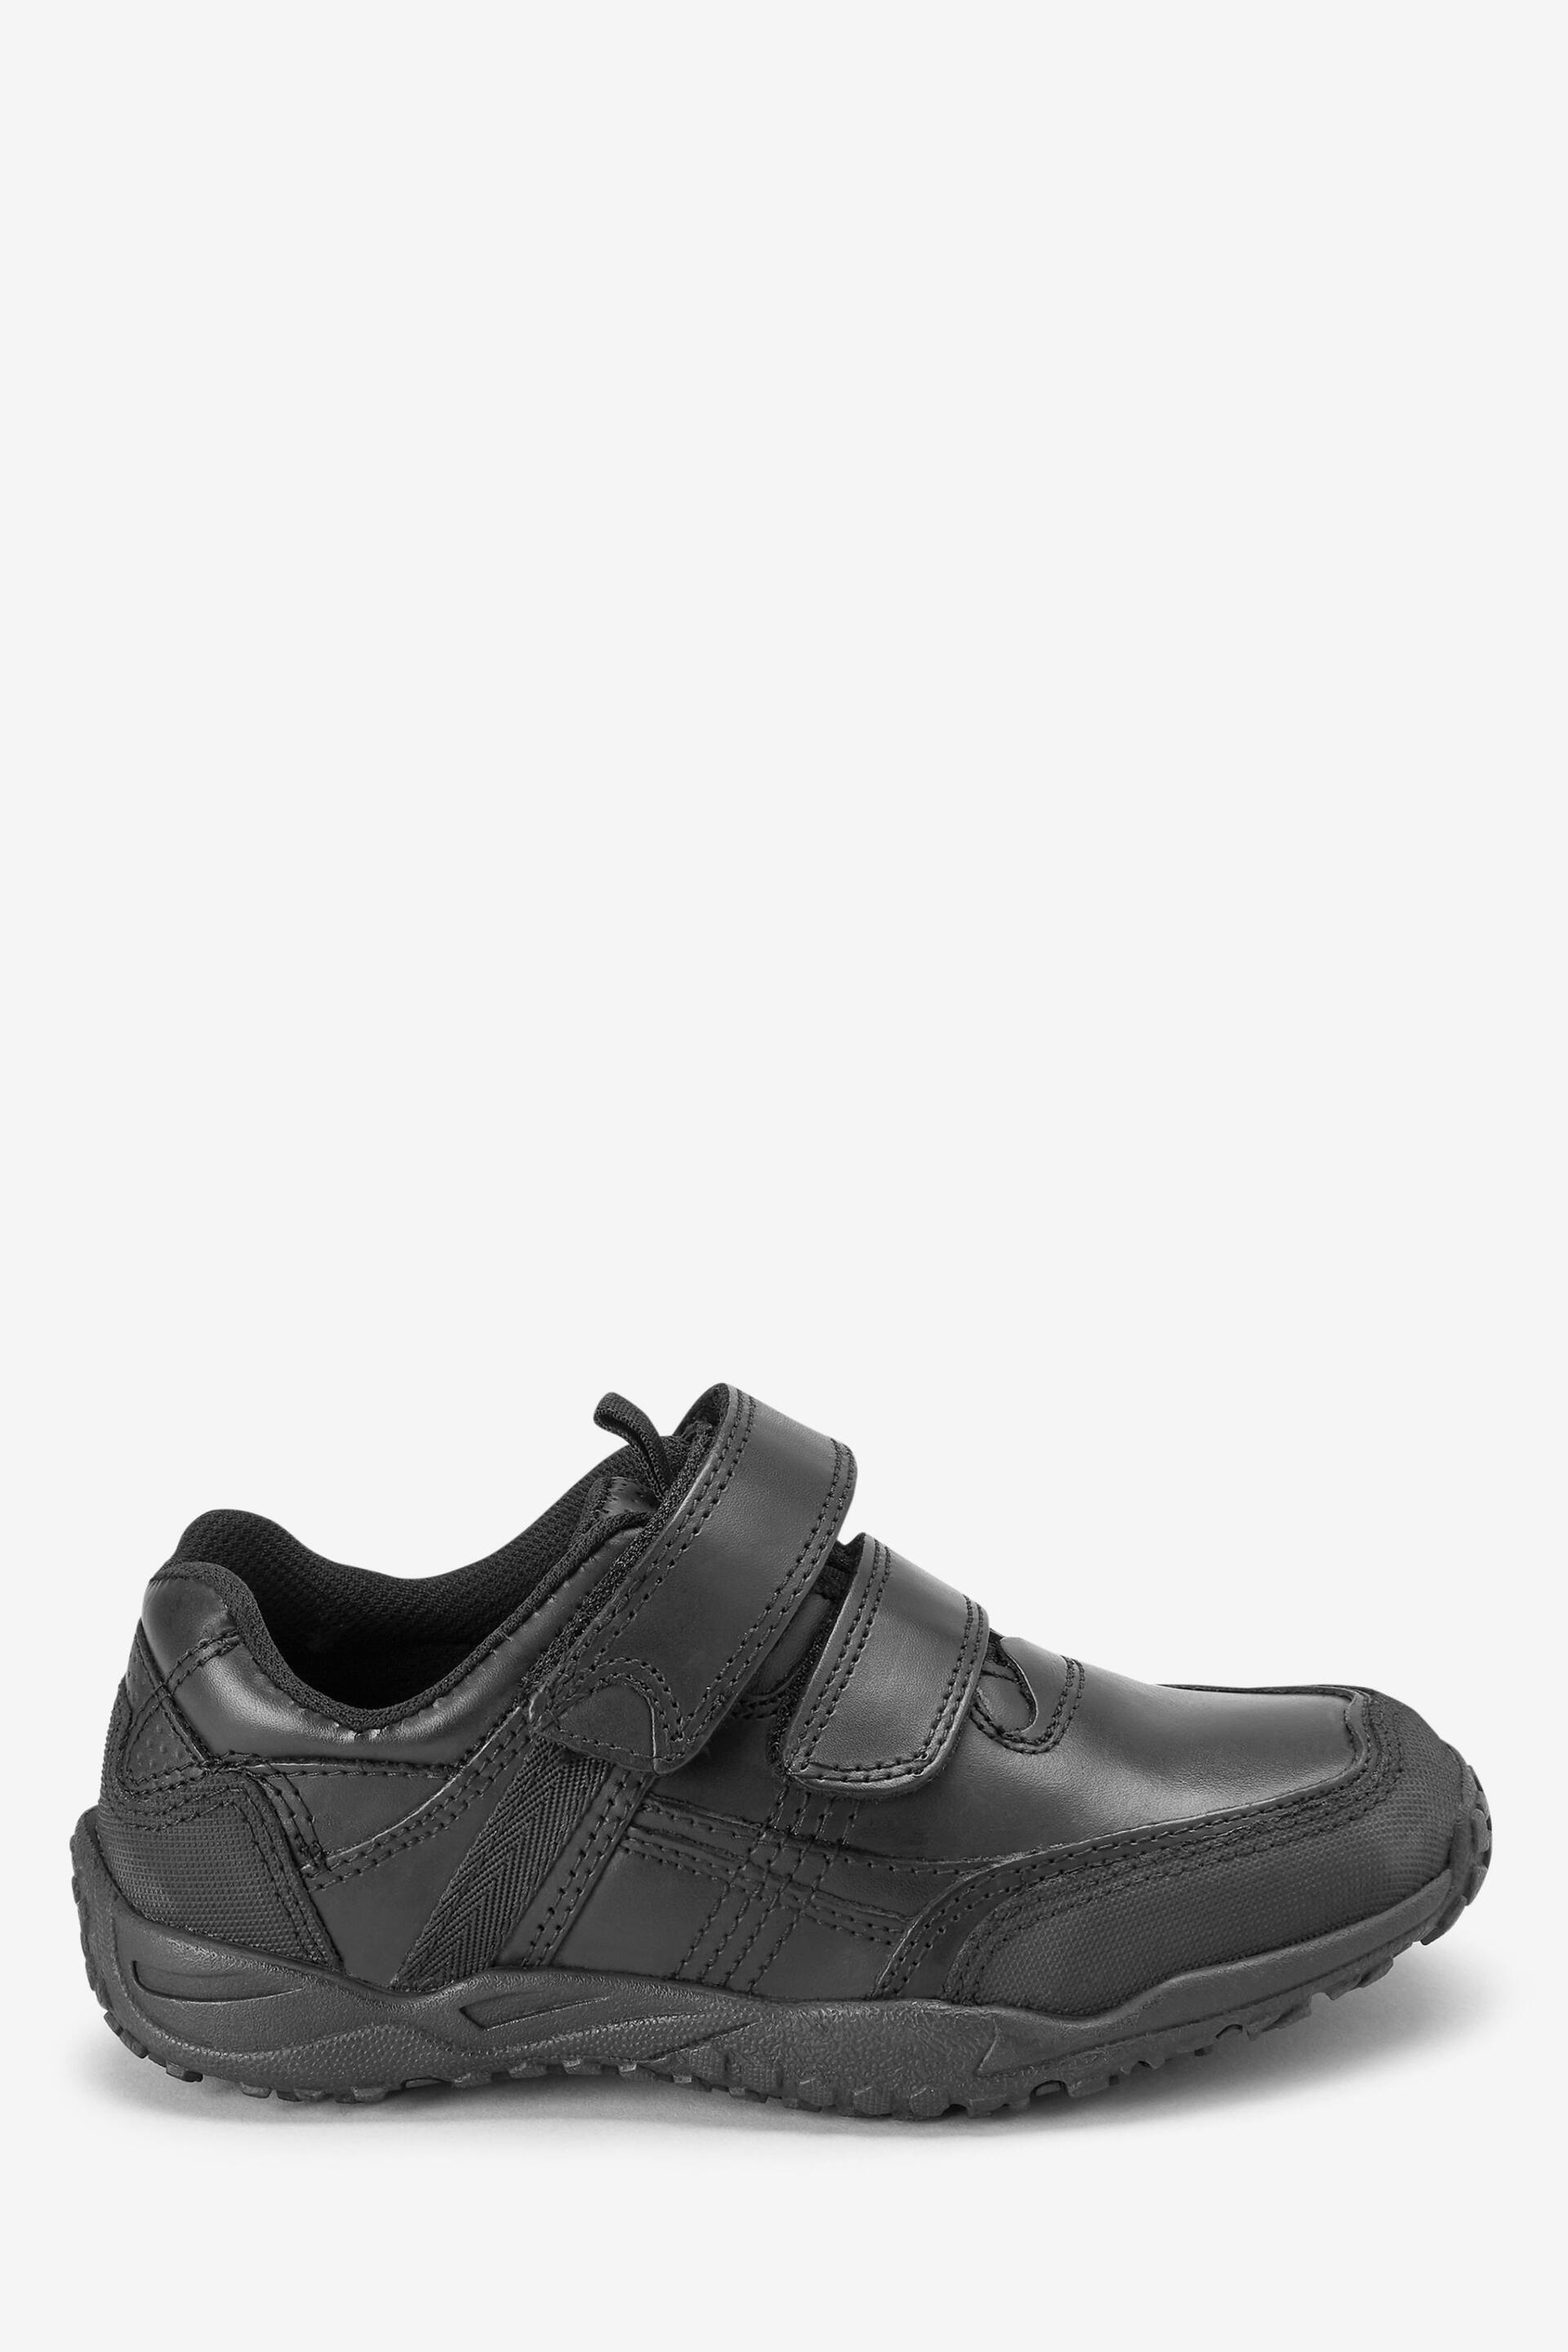 Black Narrow Fit (E) School Leather Double Strap Shoes - Image 1 of 8